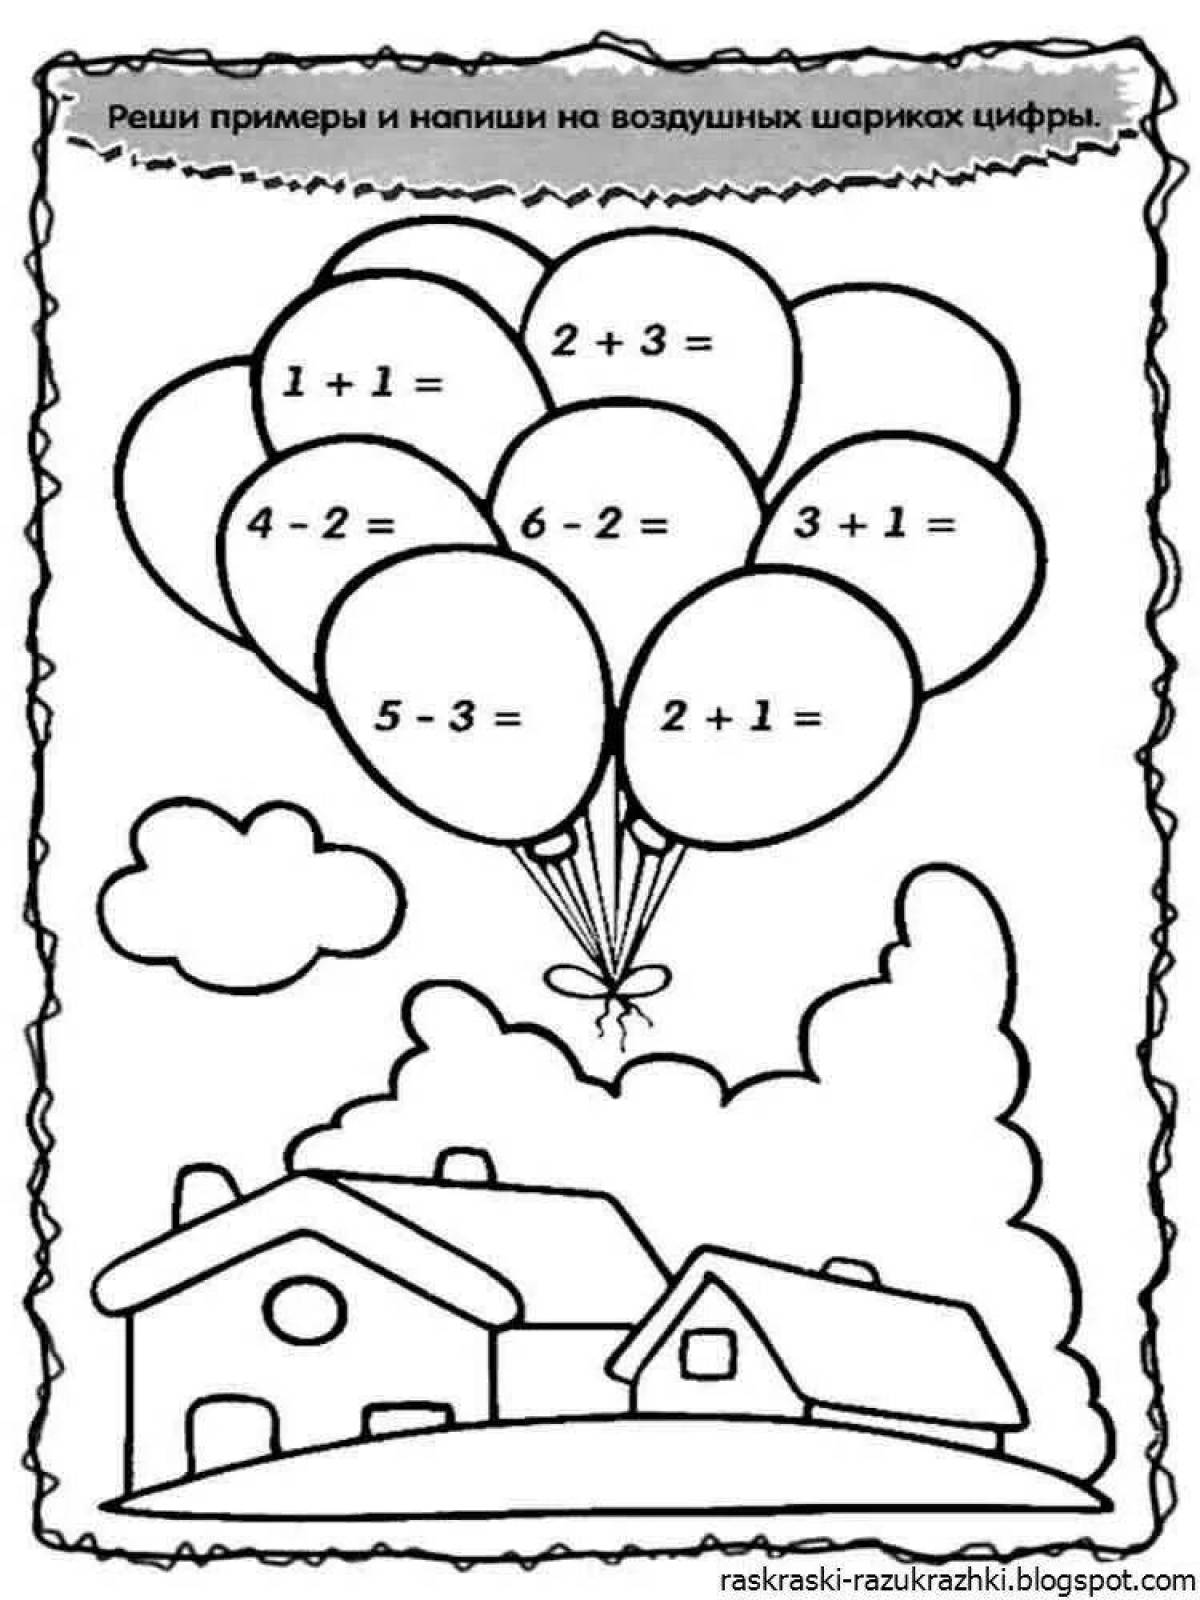 Fun coloring book for preschoolers with tasks